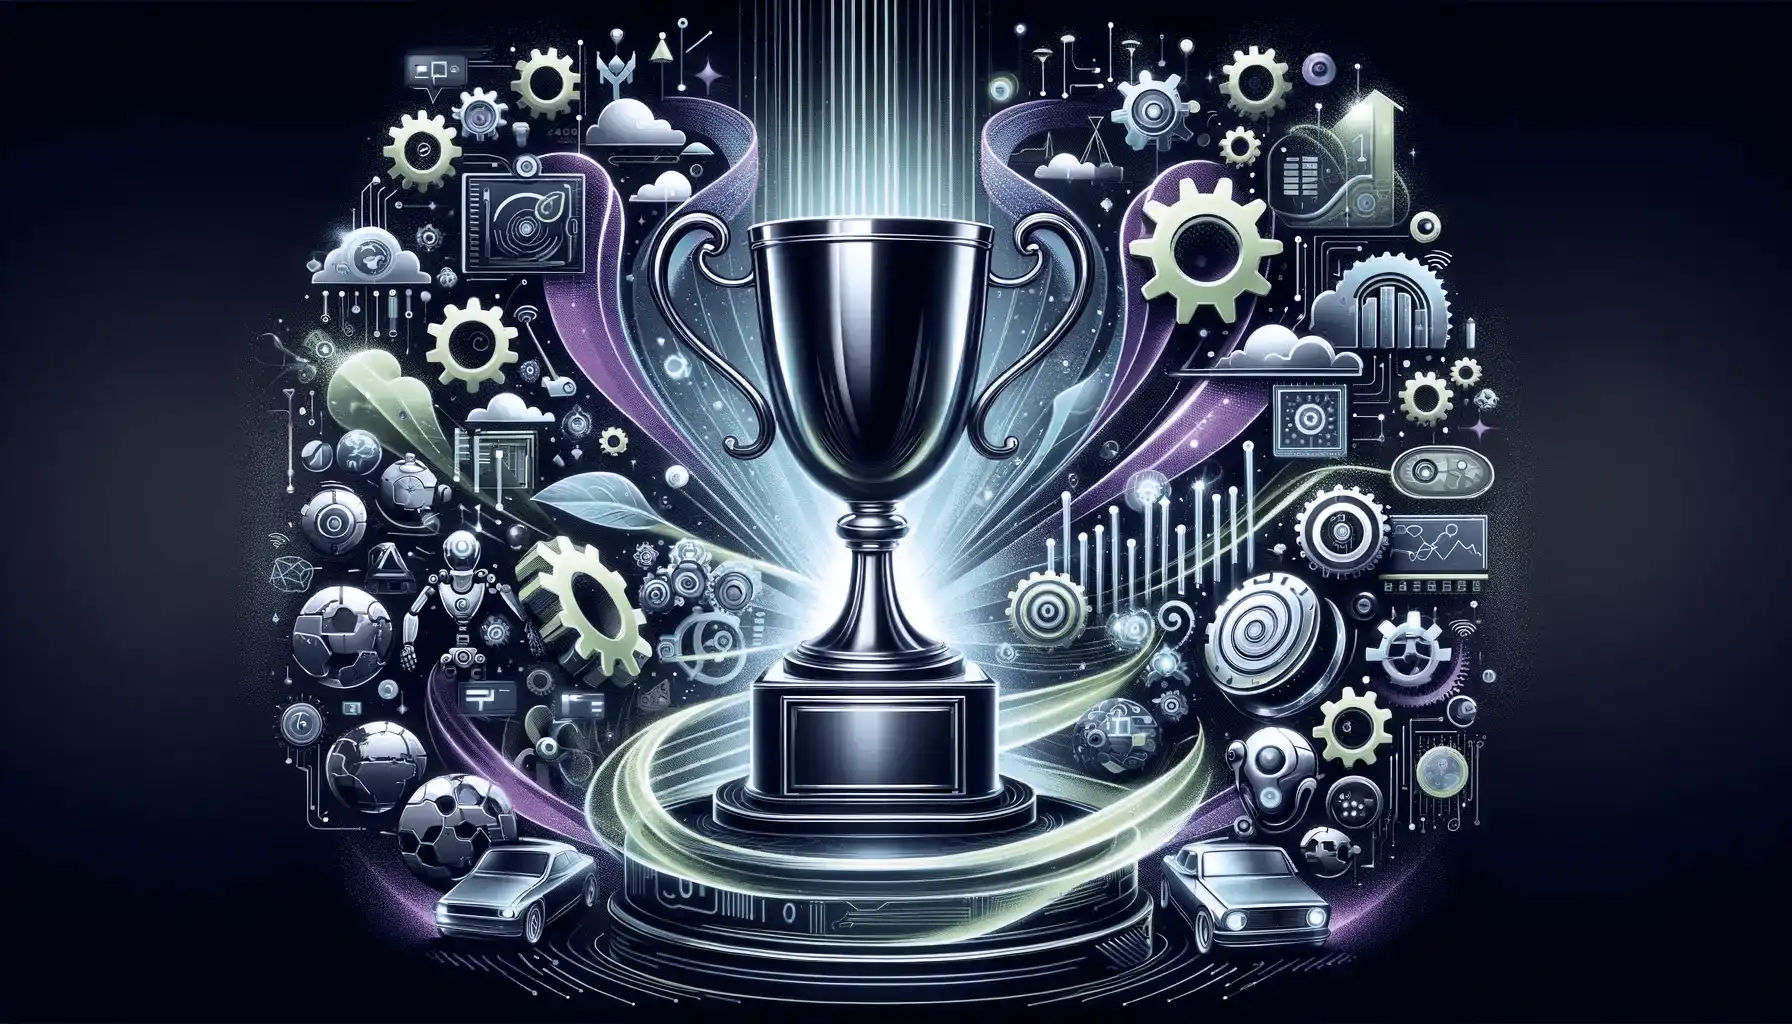 This image showcases the success and recognition of a digital solutions company in the field of advanced technology implementation. Central to the design is a large, impressive trophy, symbolizing the company's achievements and accolades in the industry. Surrounding the trophy are visual elements like gear cogs and robotic figures, representing the advanced technological solutions provided by the company. Additionally, data streams flow around these elements, further emphasizing the company's expertise in digital innovation. These components are interconnected with bright neon green and purple streams of light and data, conveying a sense of cutting-edge innovation and excellence. The overall composition of the image conveys prestige, innovation, and excellence, highlighting the company's esteemed position in the field of digital technology and business solutions.